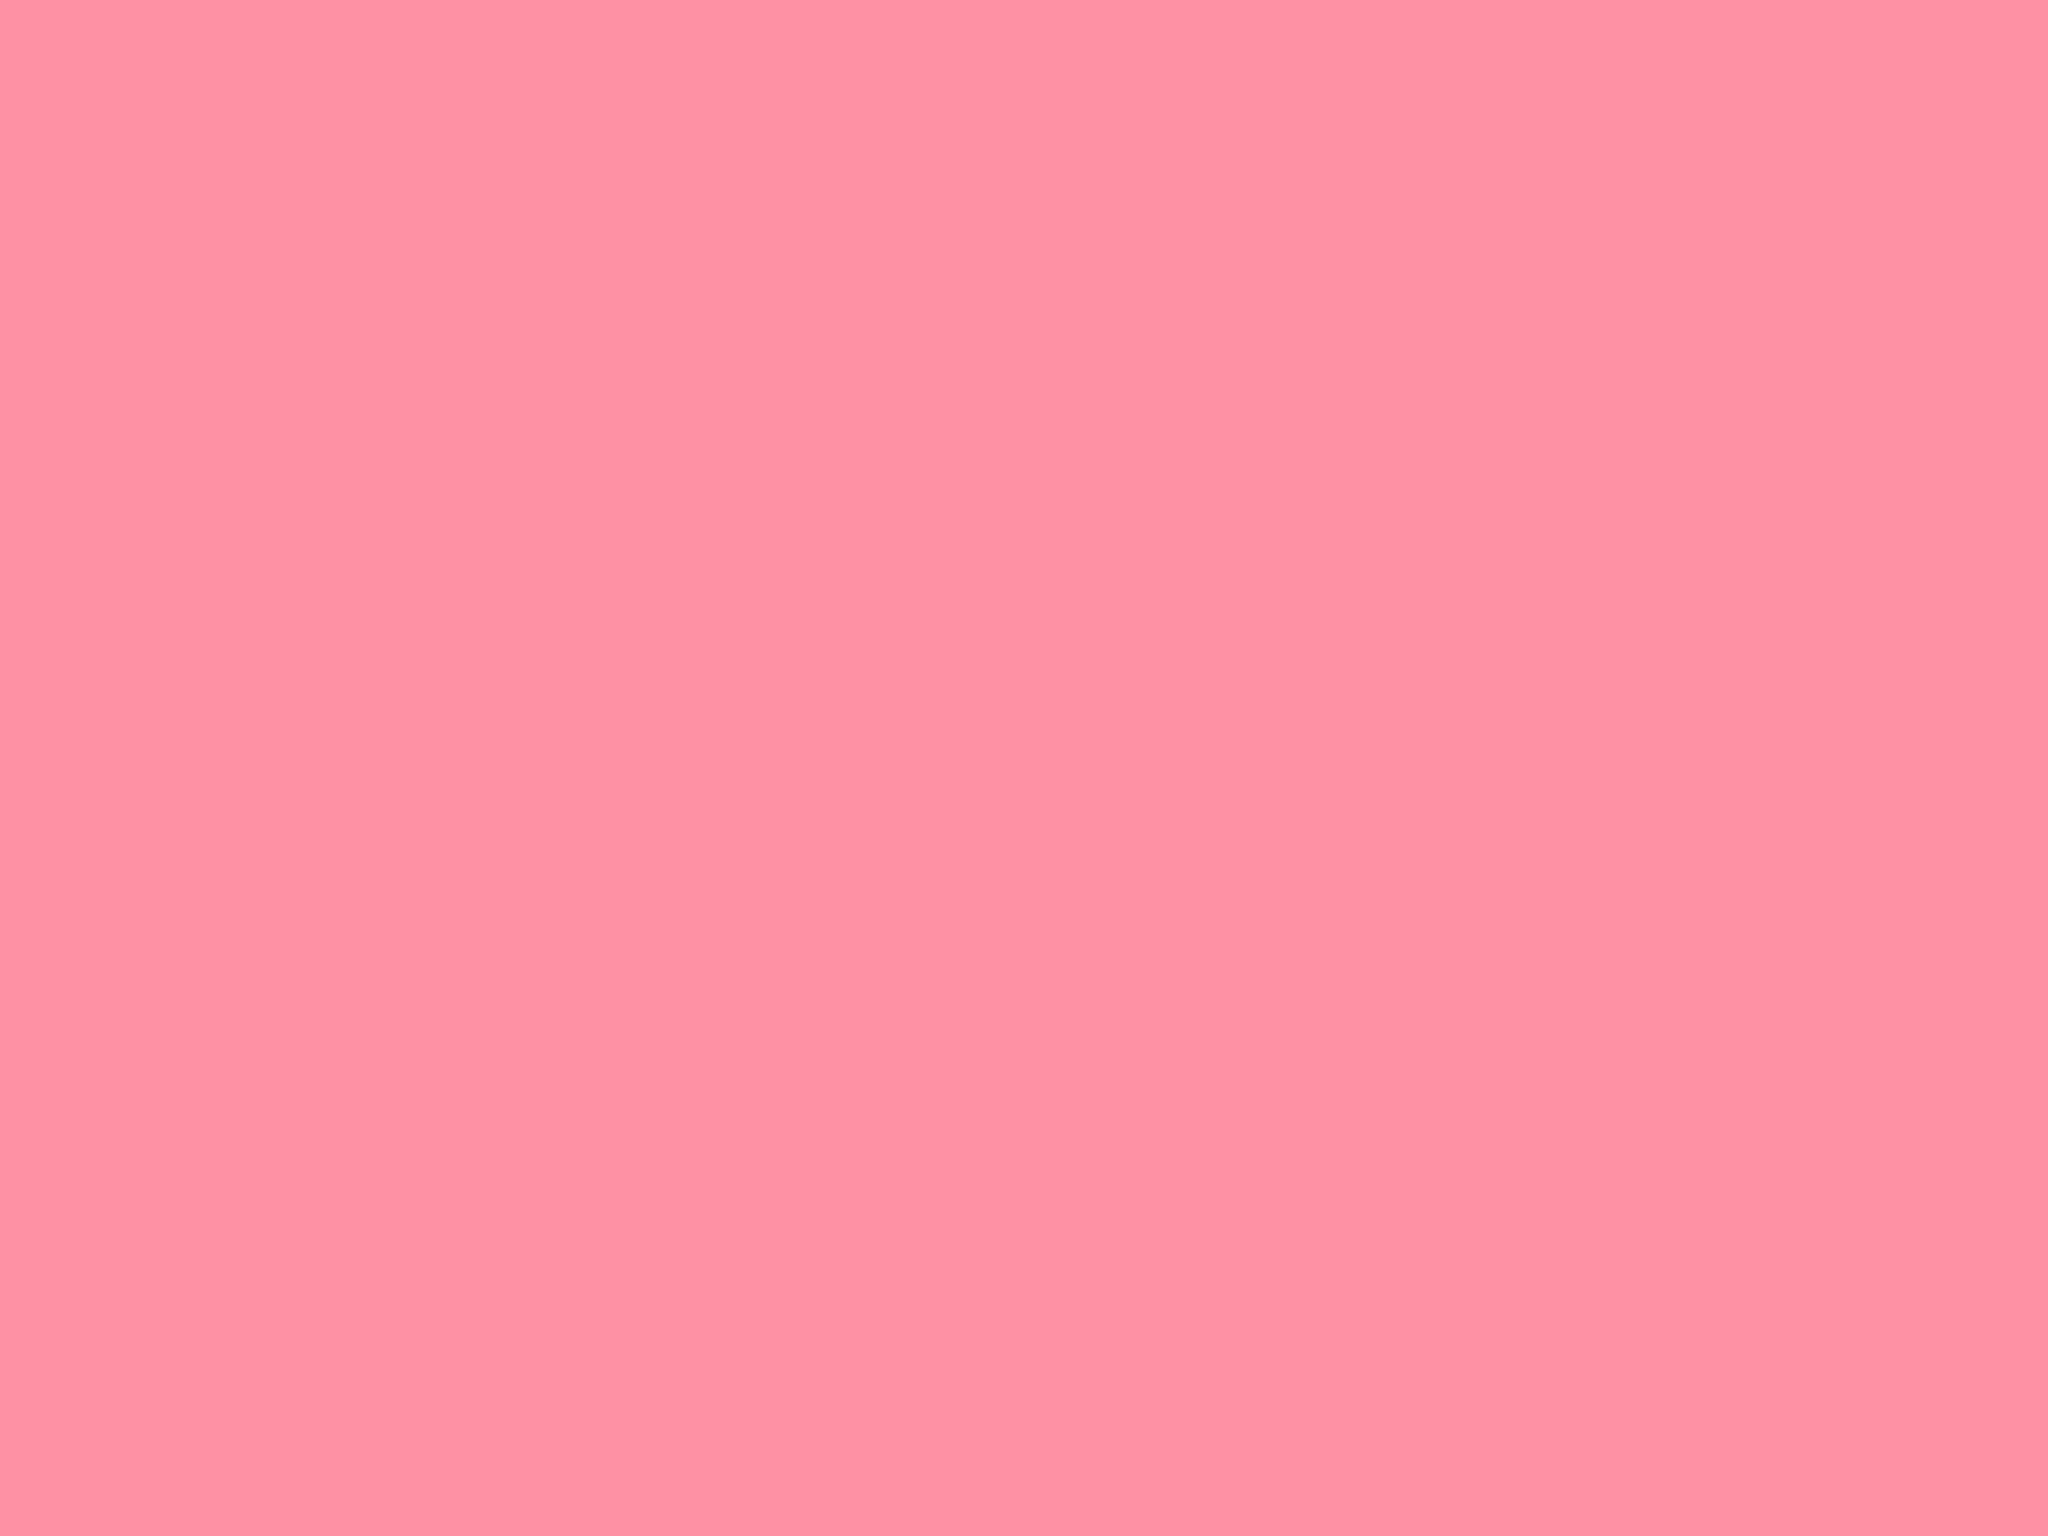 2048x1536 Salmon Pink Solid Color Background